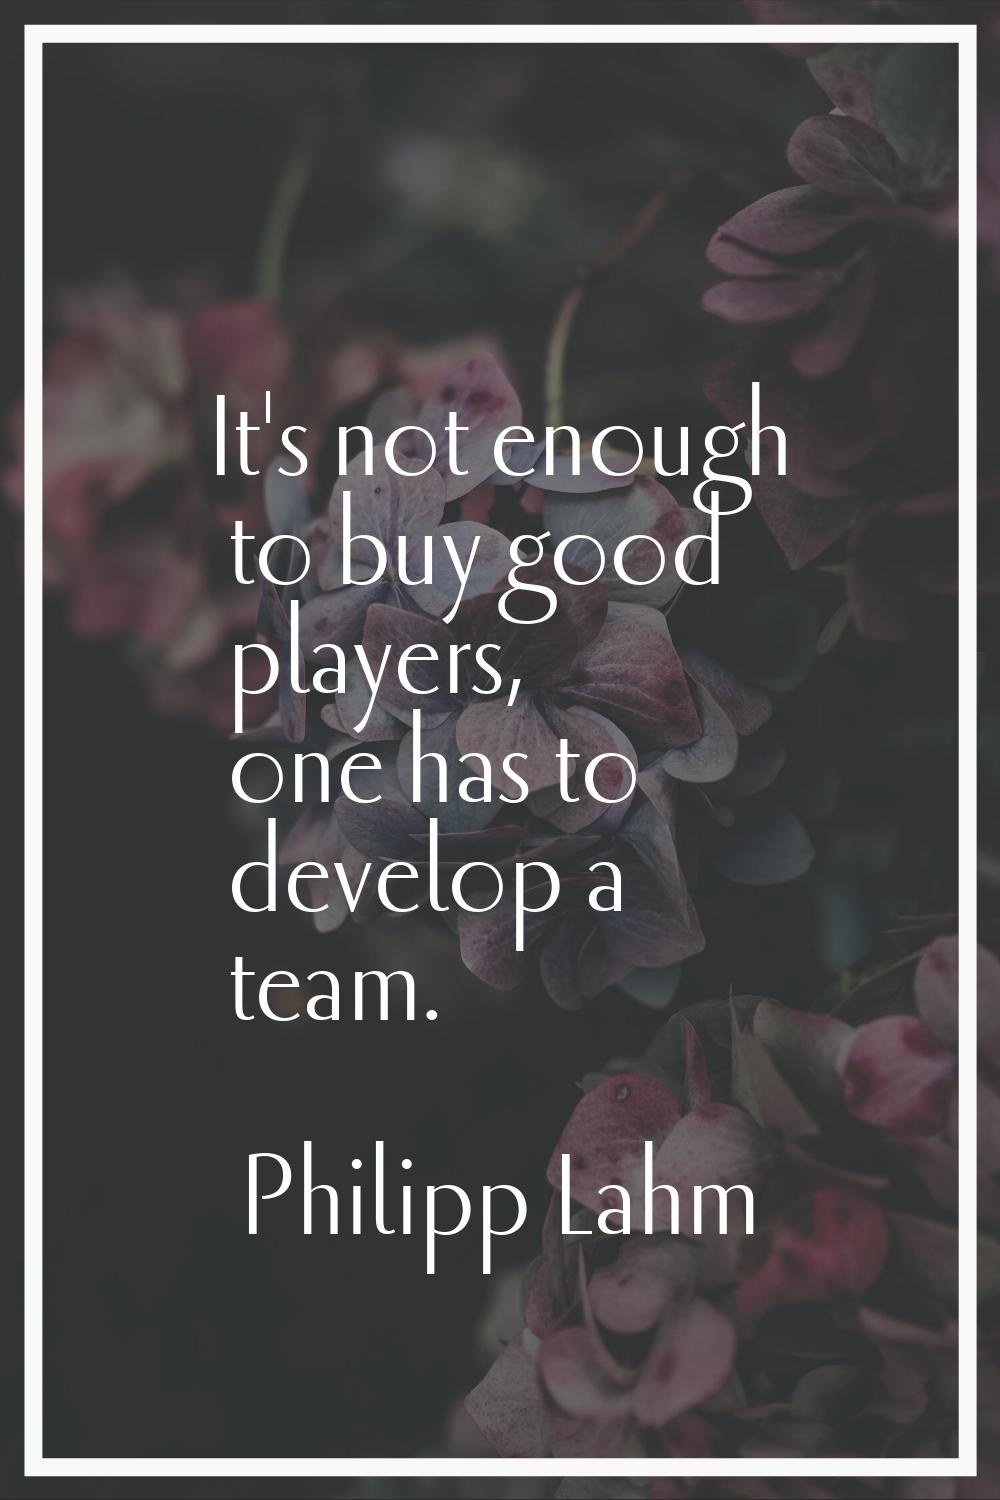 It's not enough to buy good players, one has to develop a team.